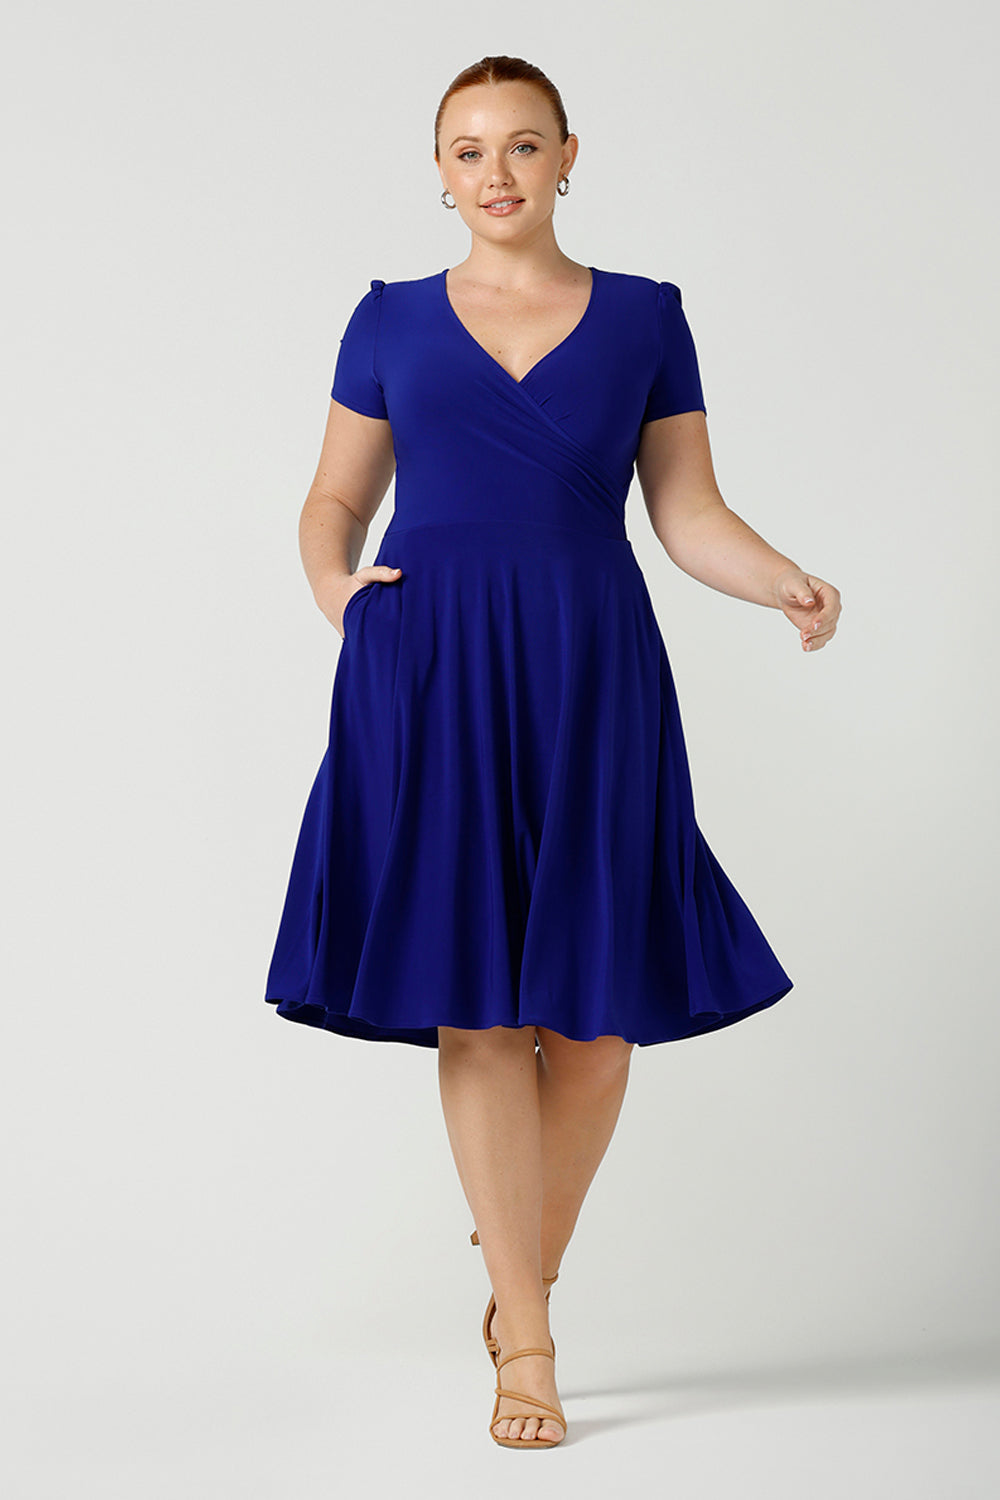  A size 12, fuller figure woman wears a jersey dress with short sleeves. In cobalt blue jersey, this dress is a good casual dress for weekend wear capsule wardrobes. Shop Australian-made dresses online is sizes 8 to 24.